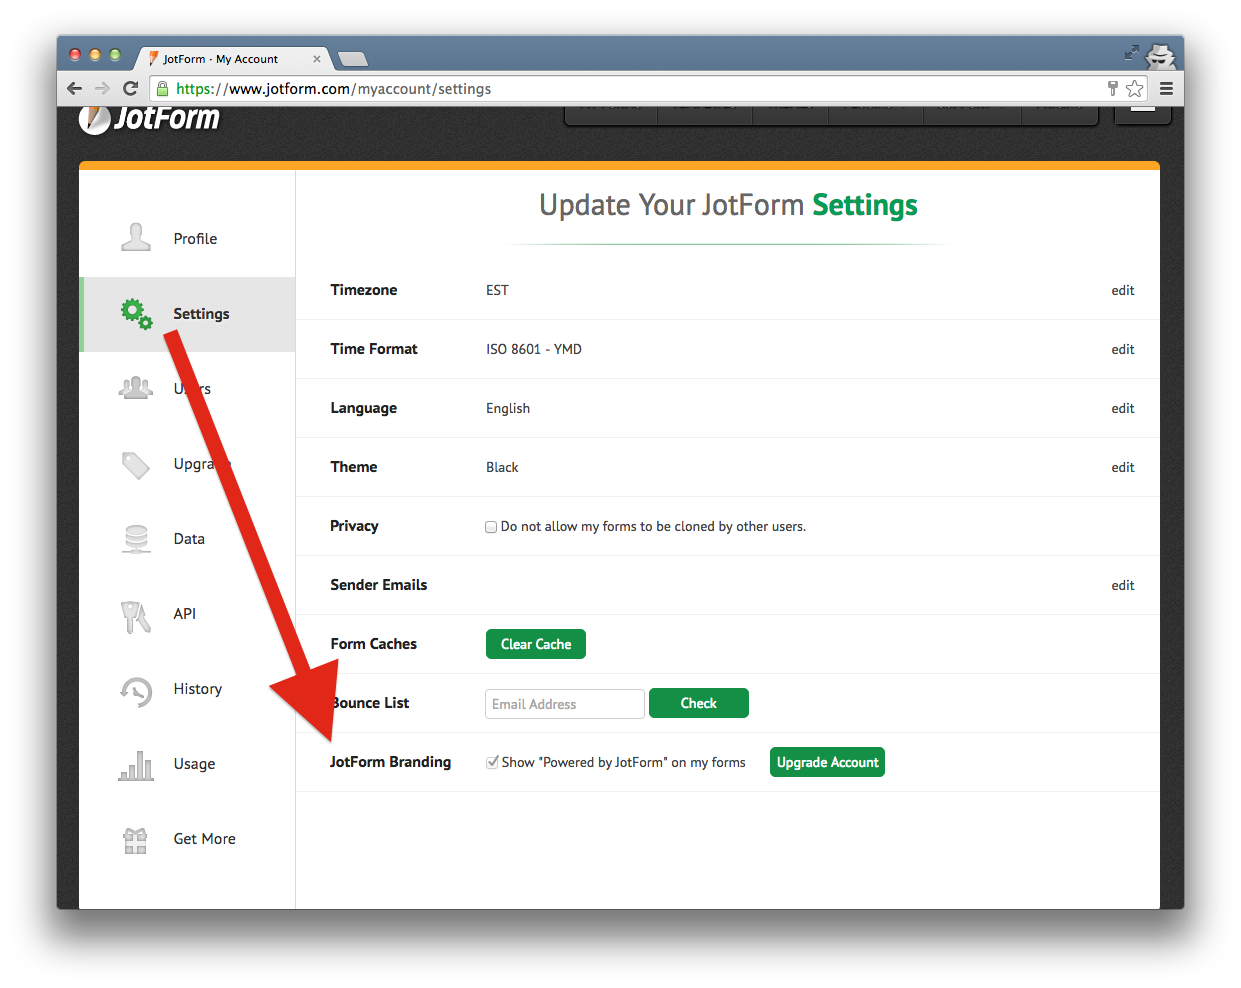 Is custom branding available for JotForm customers on all plans? If not, which plans is this feature available on? Image 2 Screenshot 41